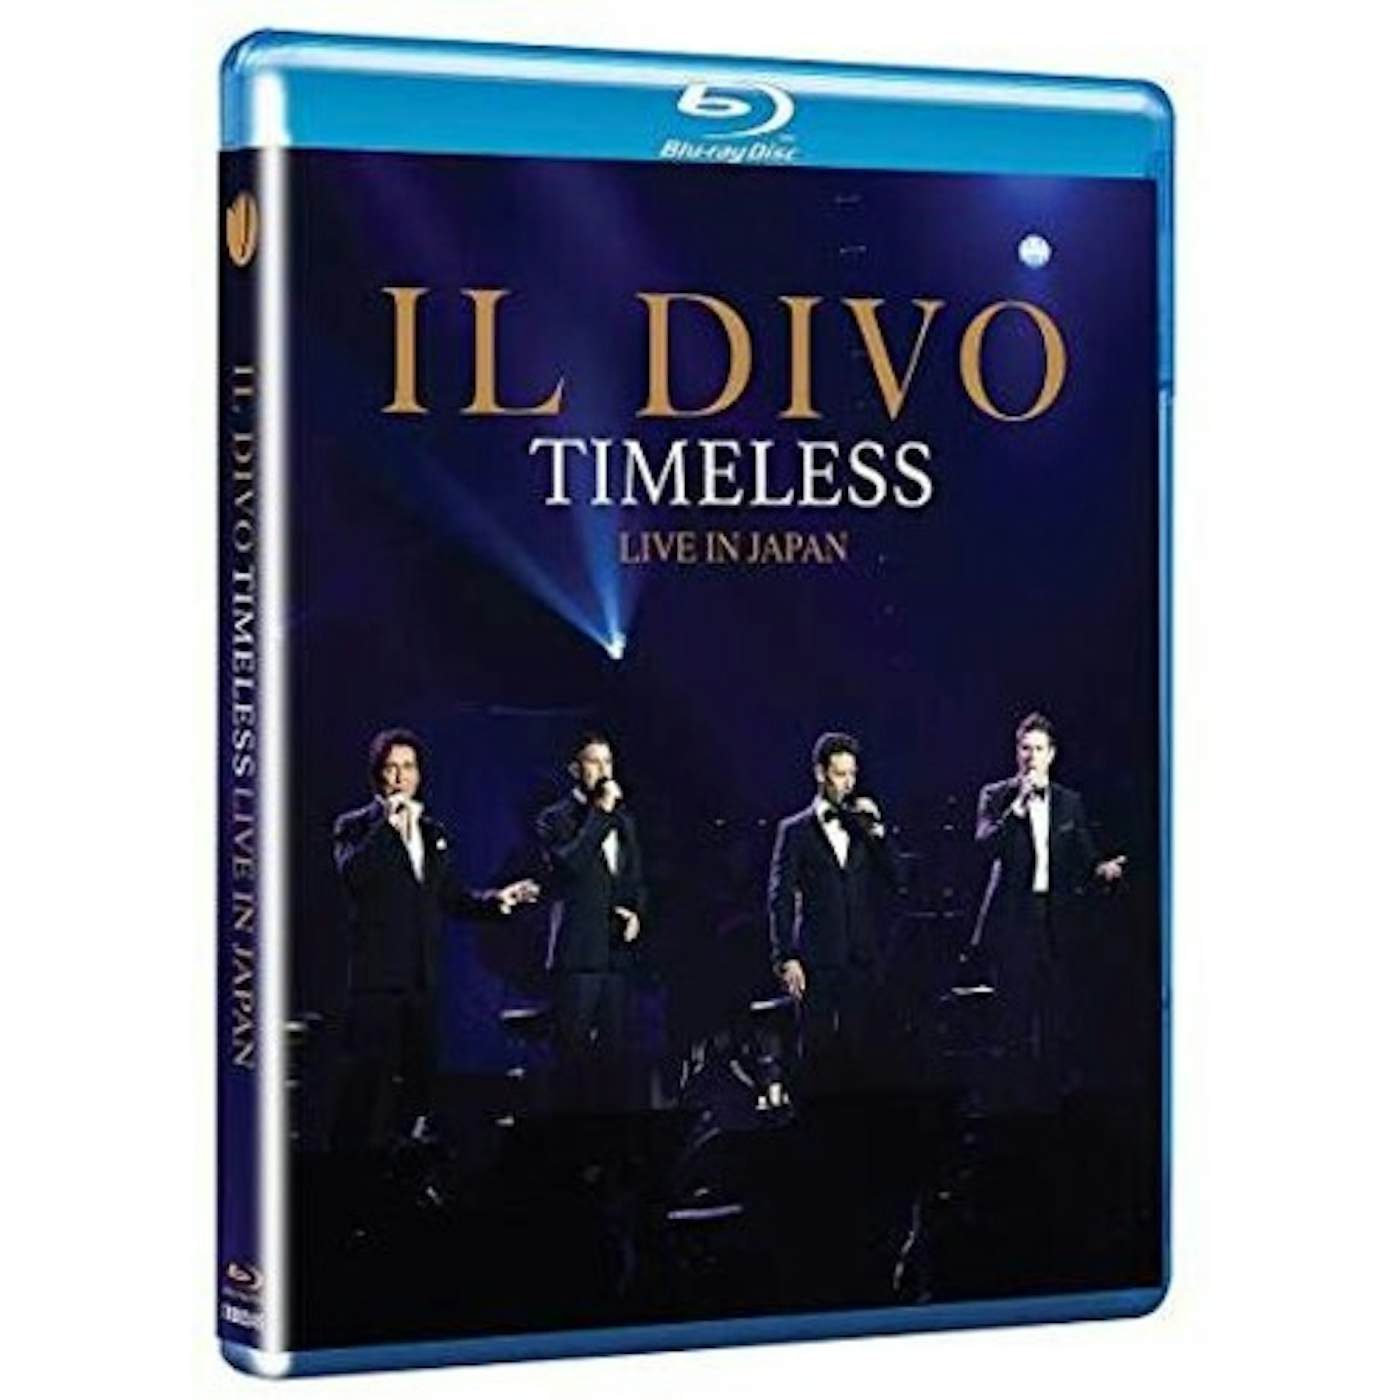 Il Divo TIMELESS LIVE IN JAPAN Blu-ray